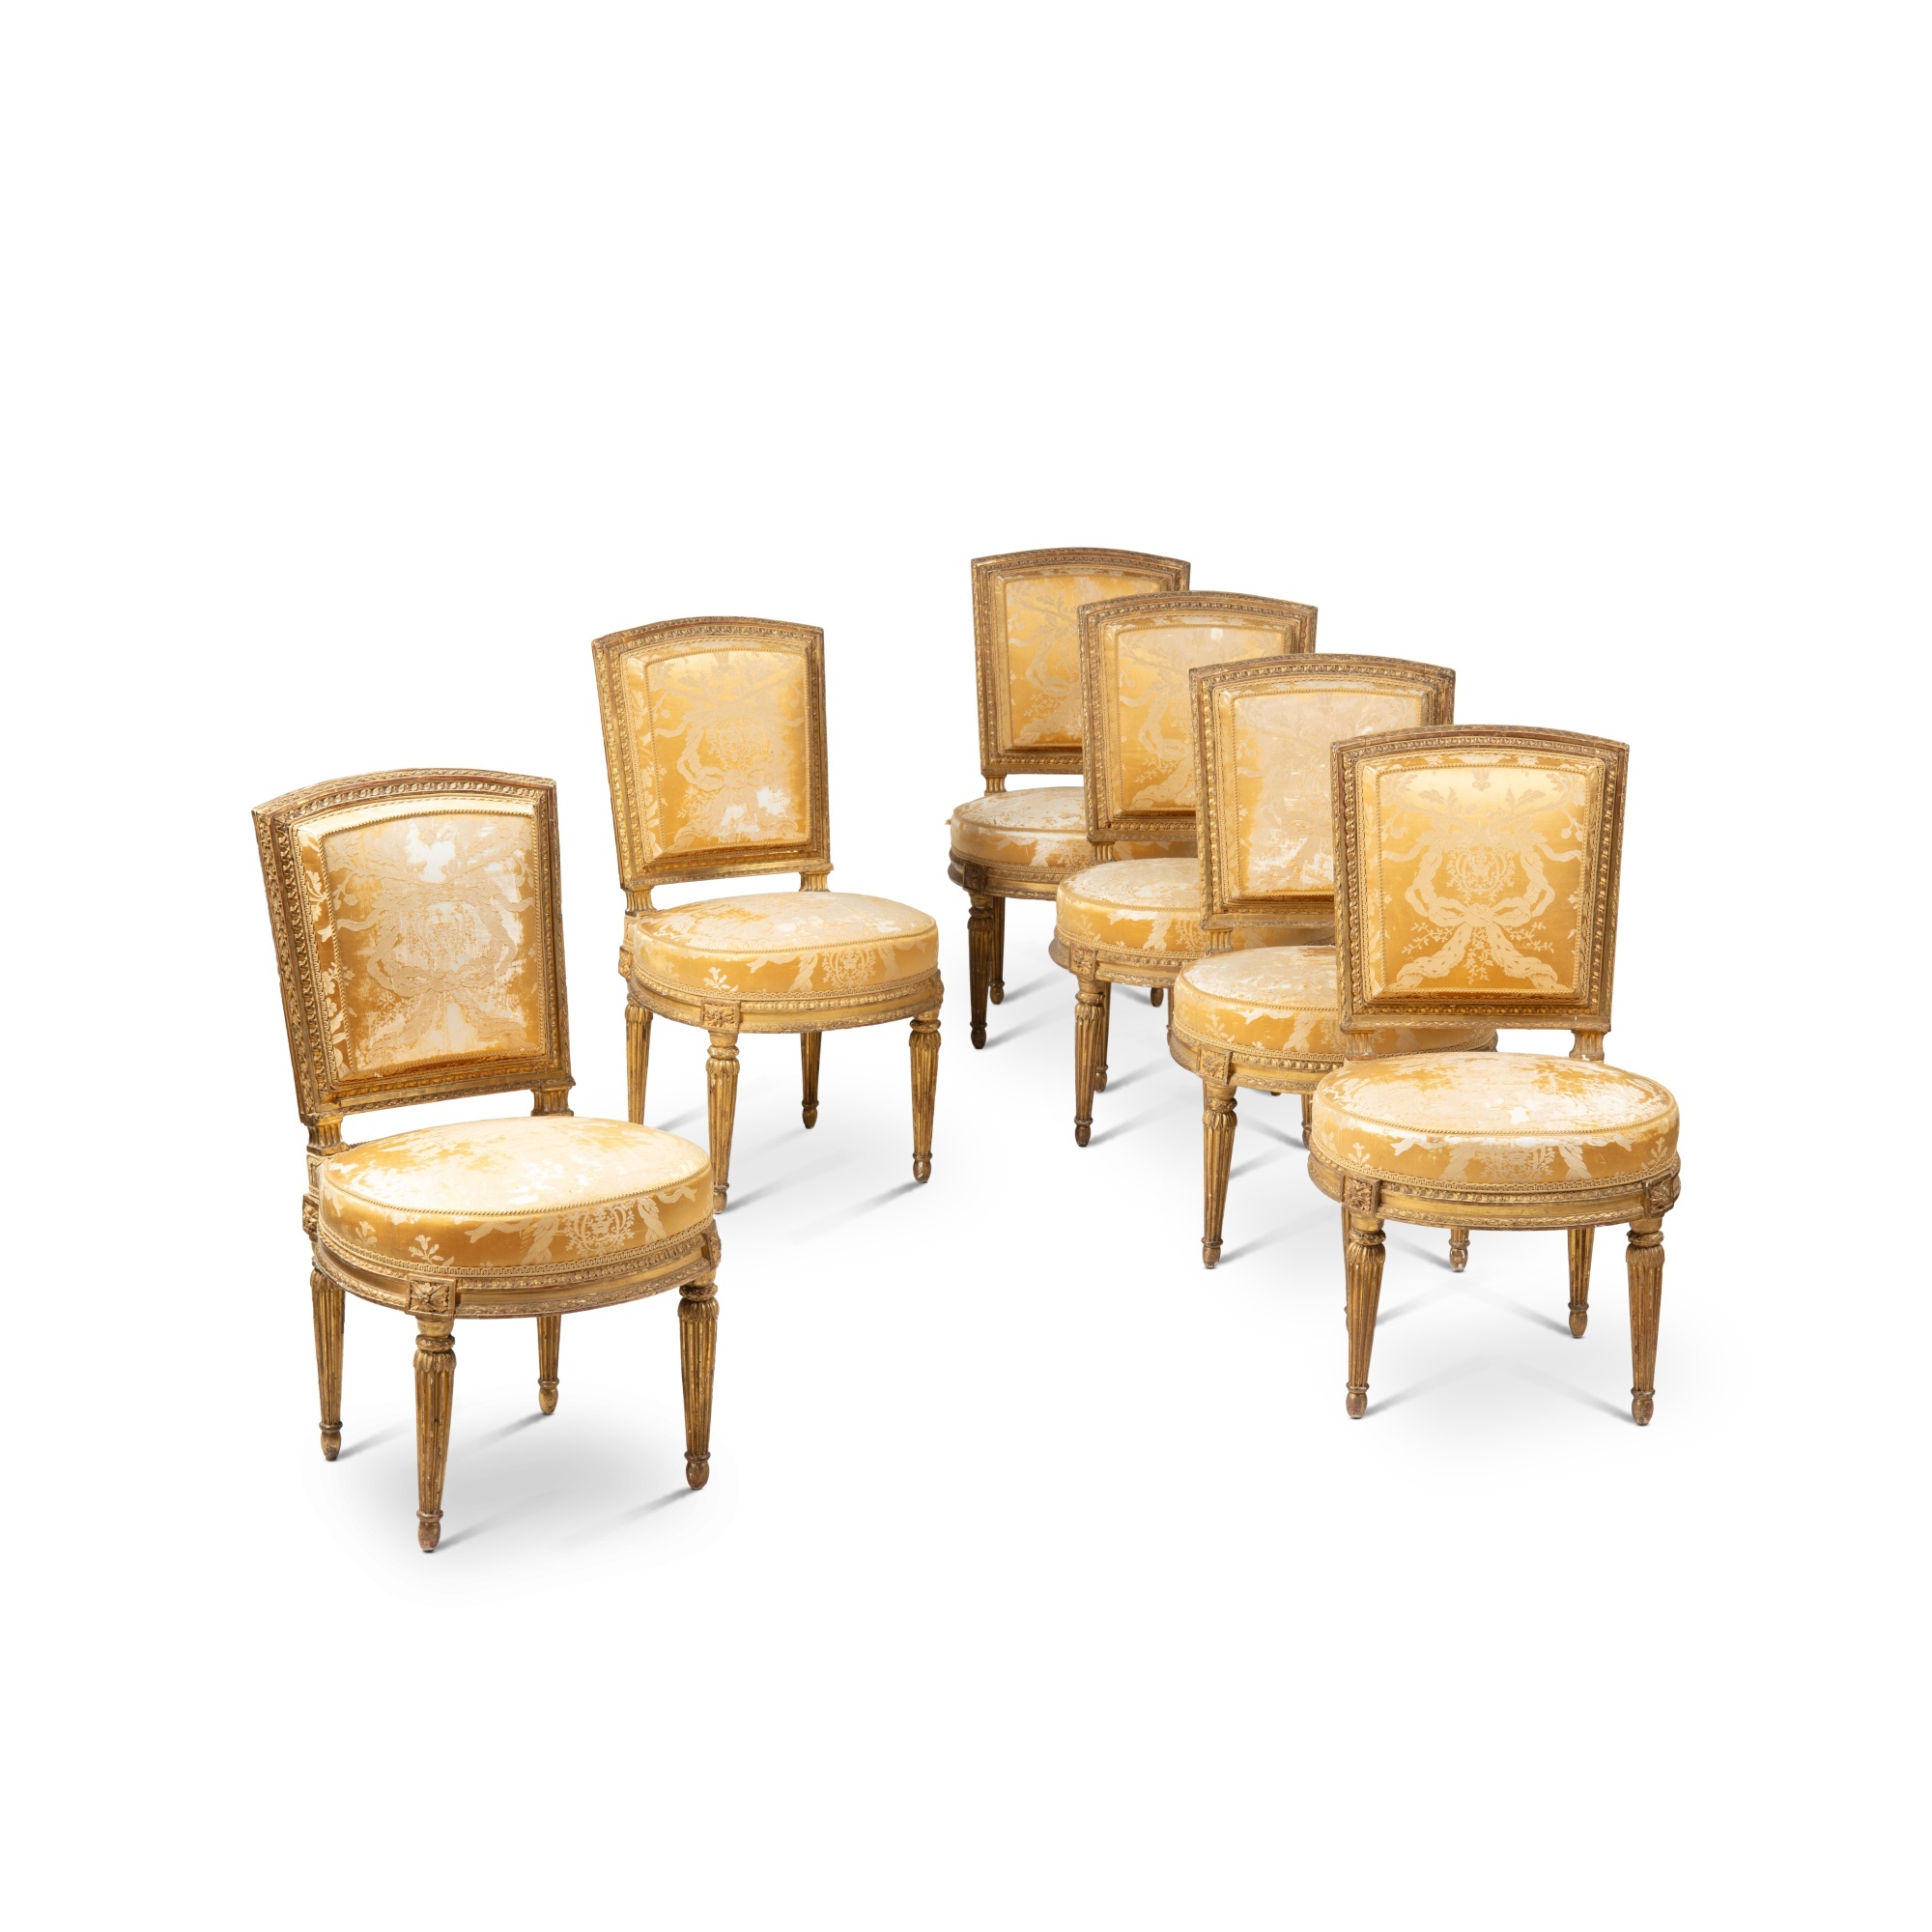 A suite of six Louis XVI giltwood chairs, stamped by Georges Jacob, the sculpture by Jean-Baptiste R